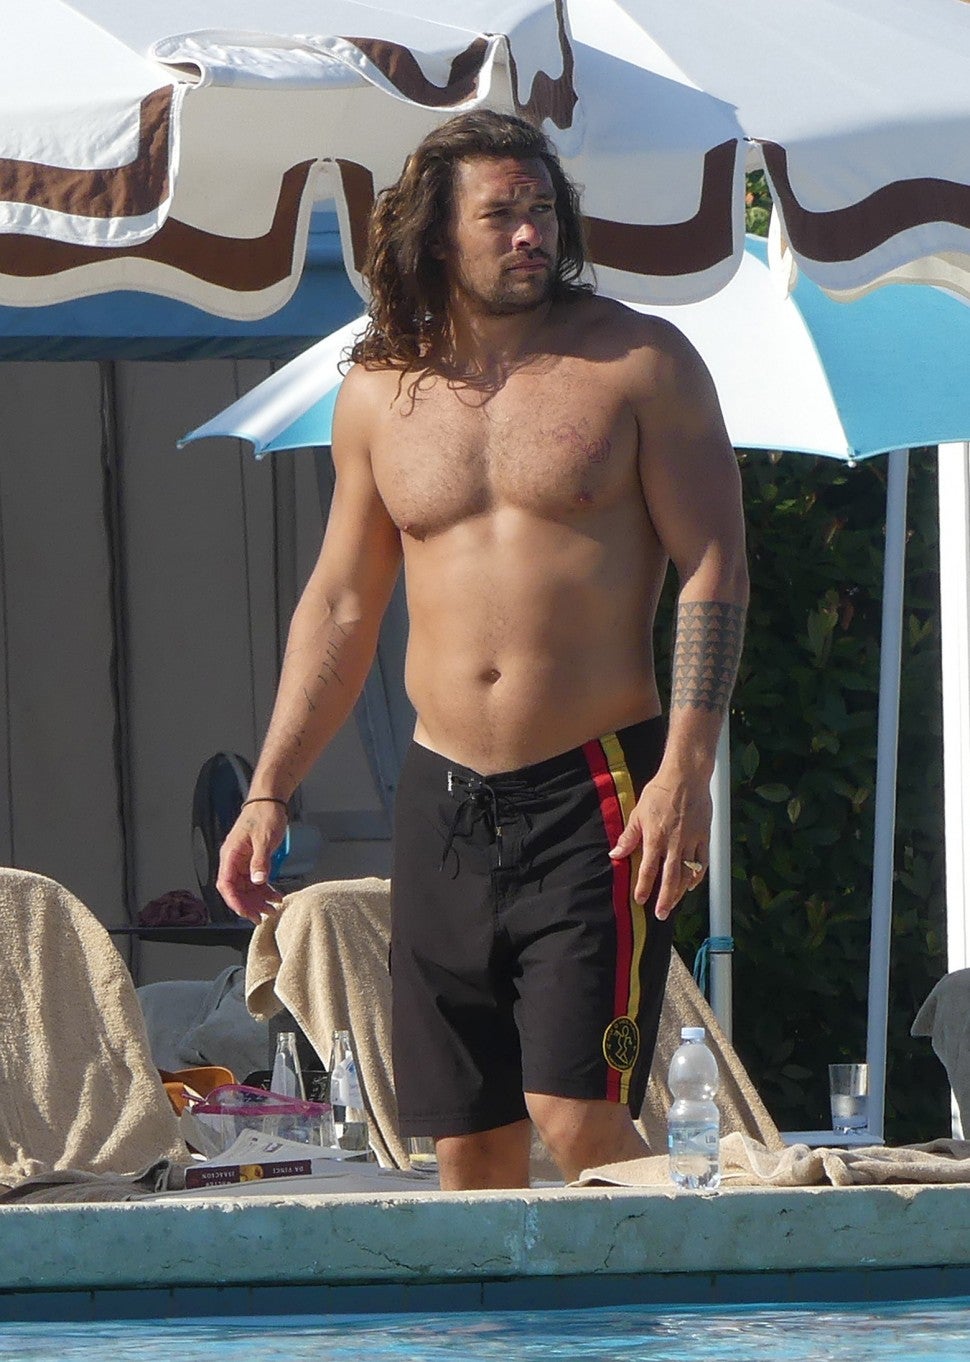 Jason Momoa shows off his ripped torso as she gets ready for a dip in the pool. The actor had his bulging biceps on display as he and wife Lisa Bonet were spotted on their romantic vacation in Venice.